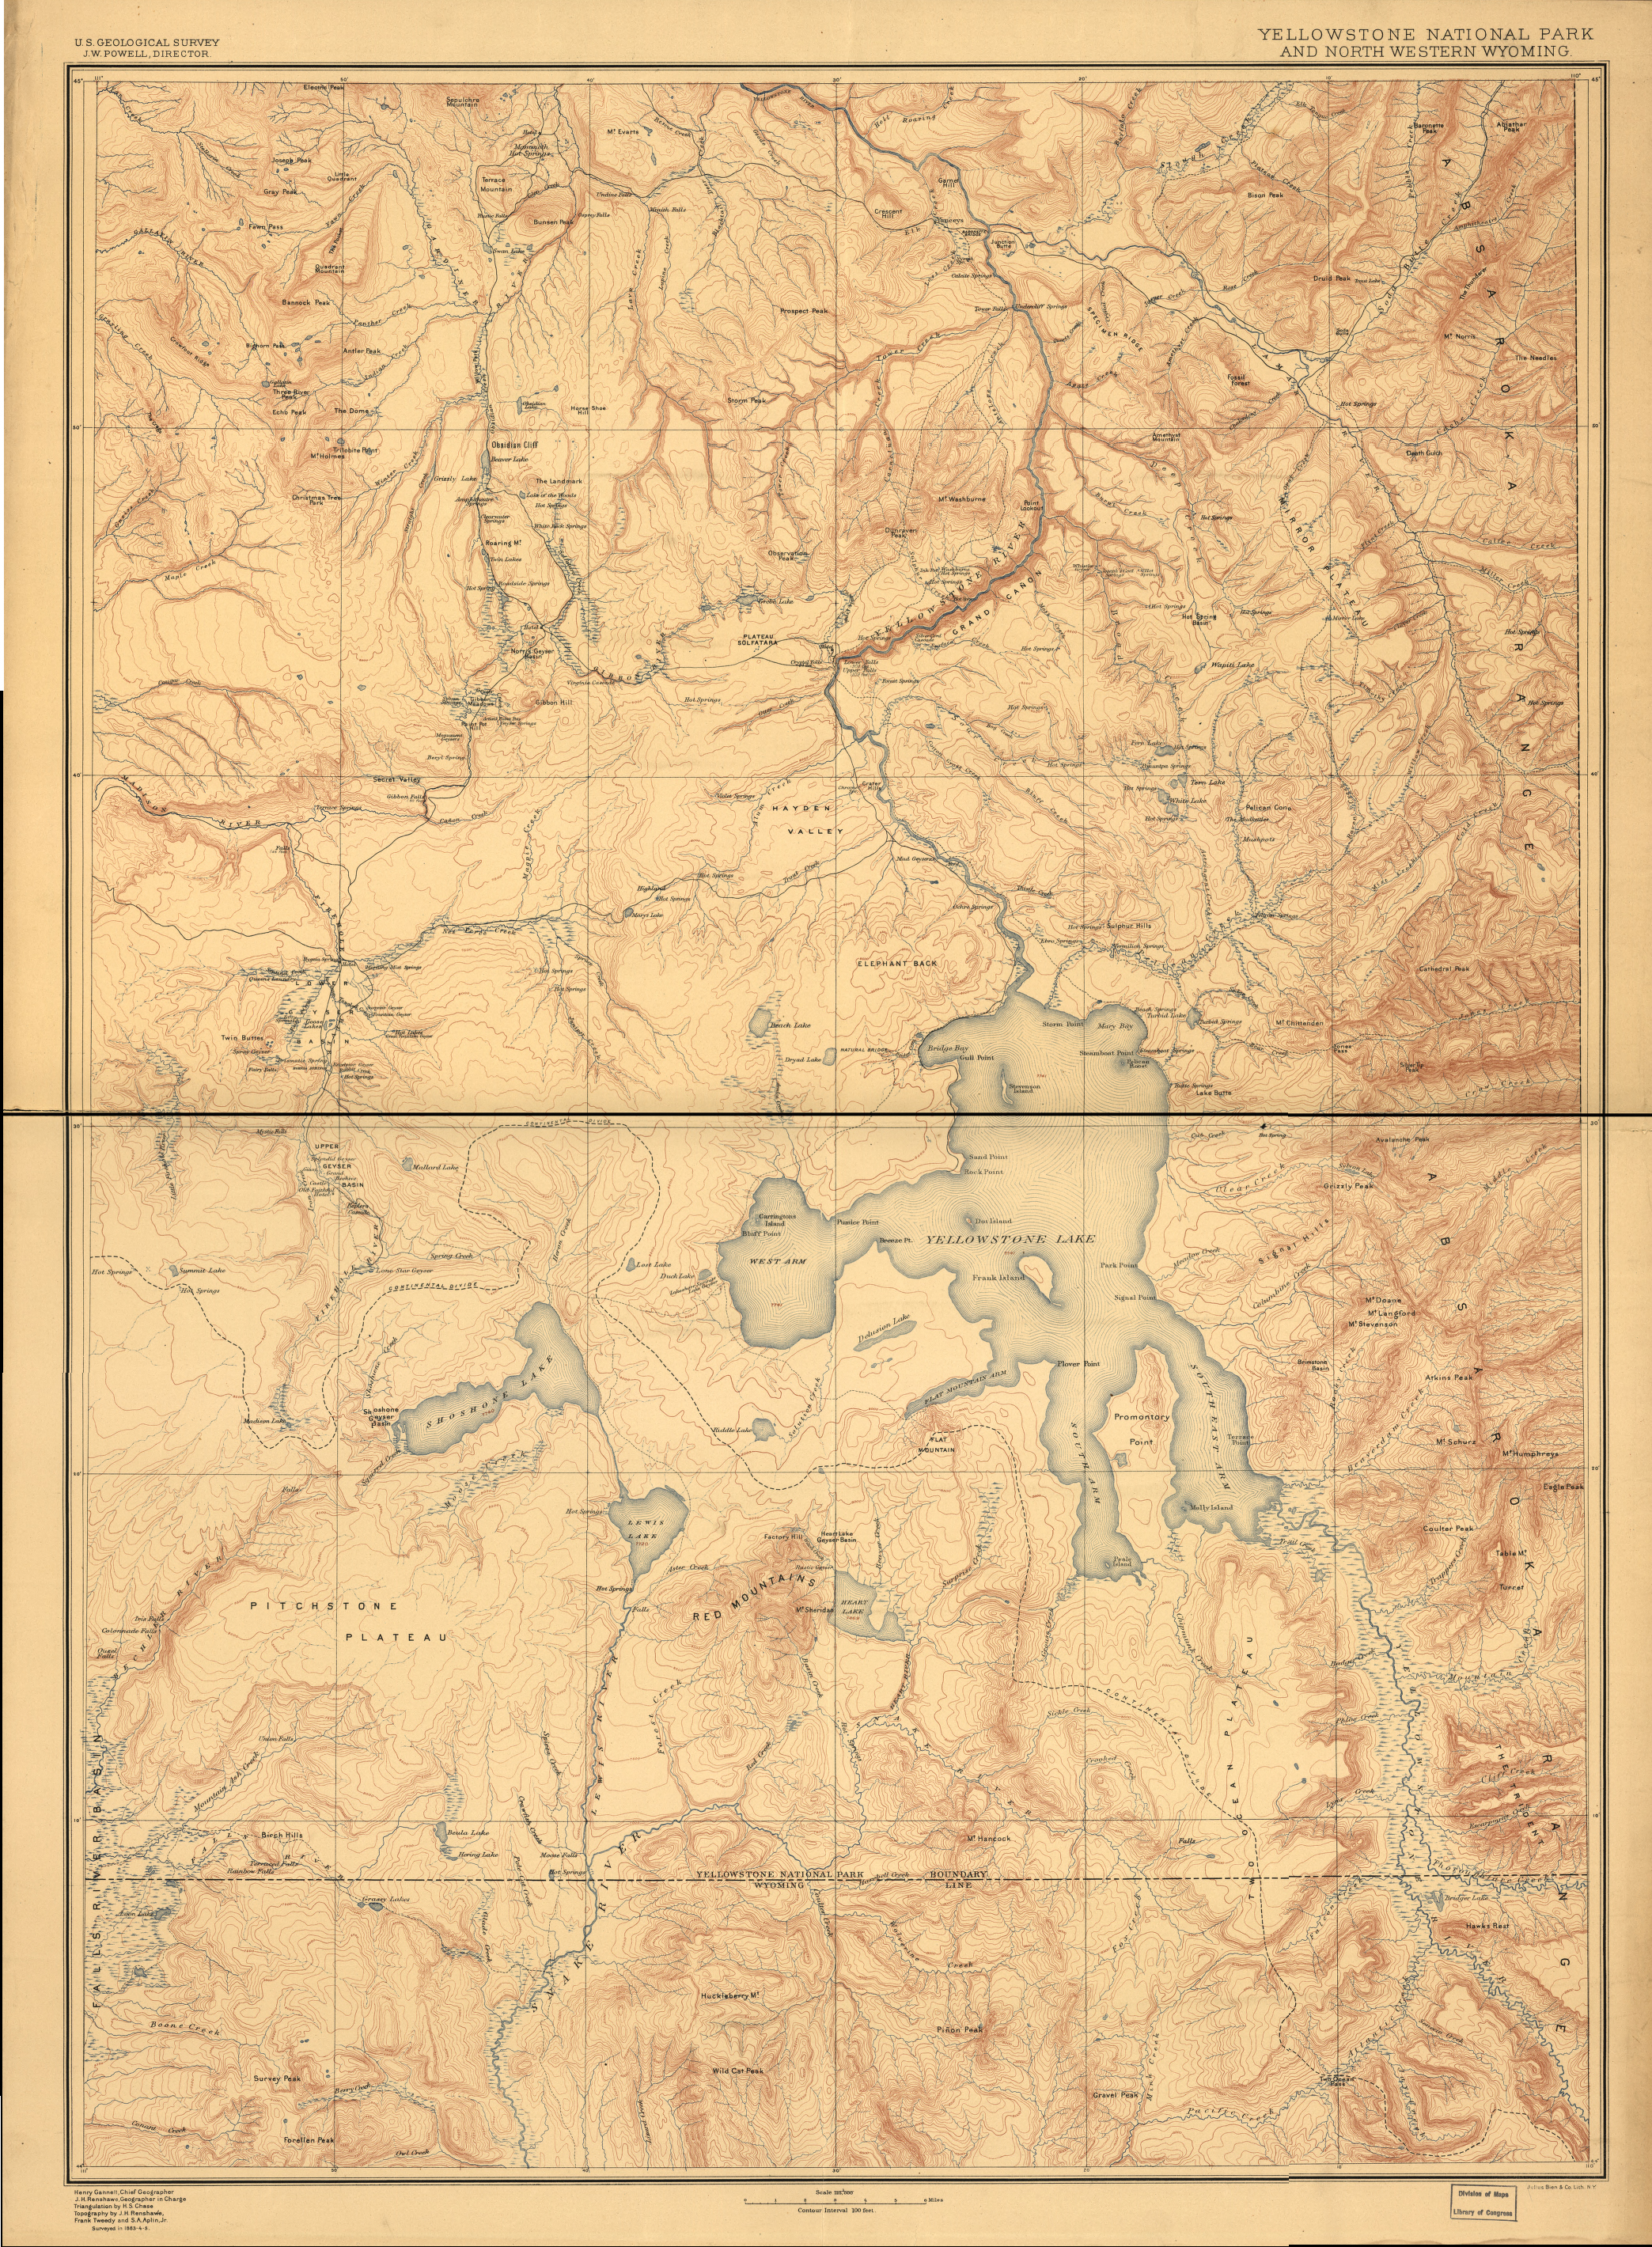 Yellowstone National Park 1883 Survey Map from the Library of Congress Collection